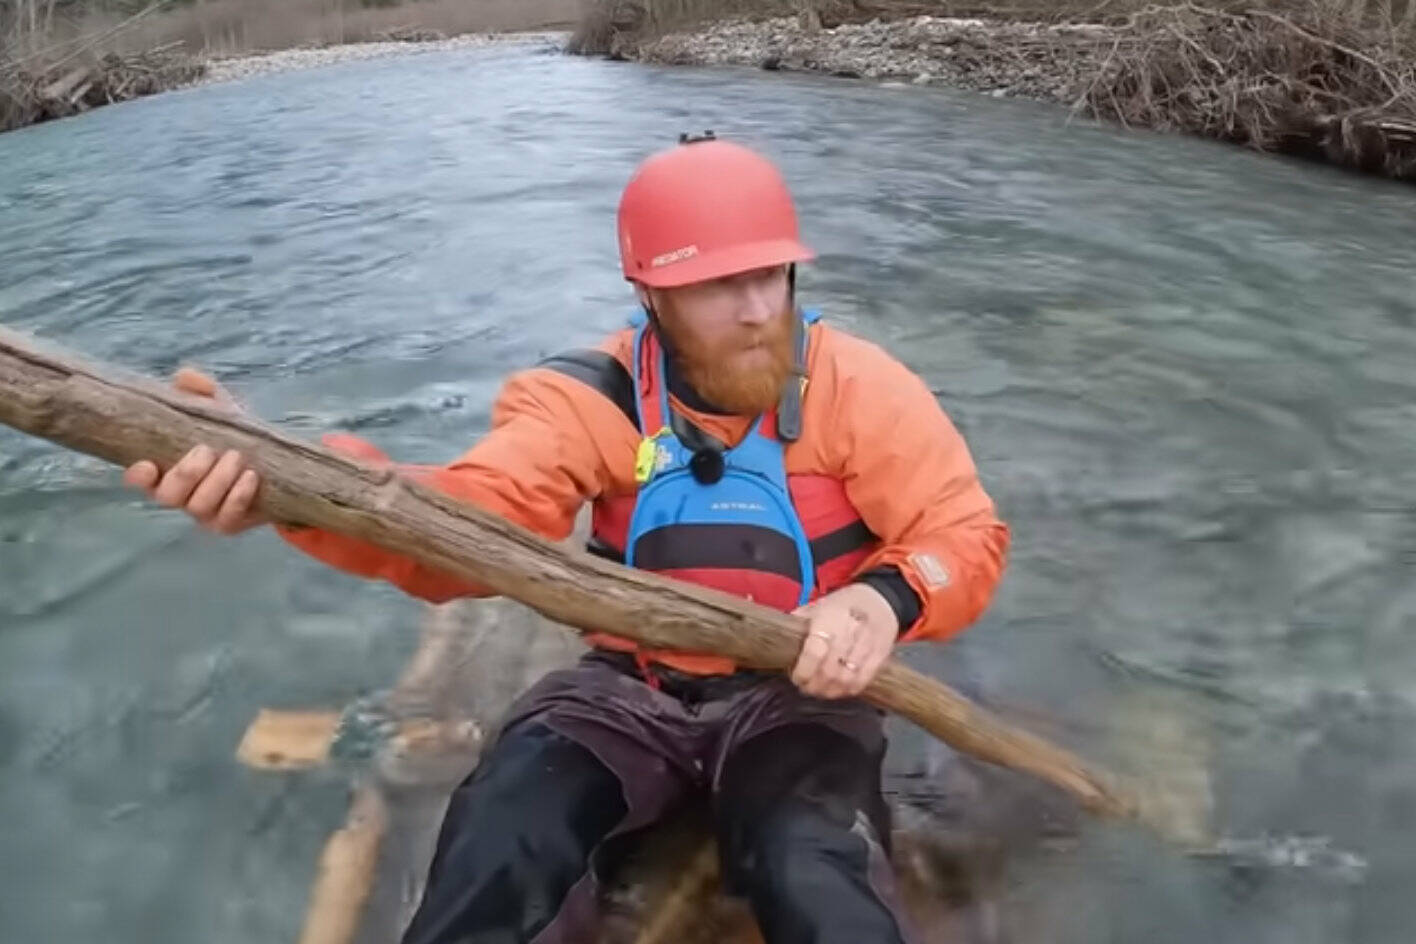 Video still from Australian YouTuber Beau Miles building a raft out of downed trees before floating down the Chilliwack River. (YouTube)